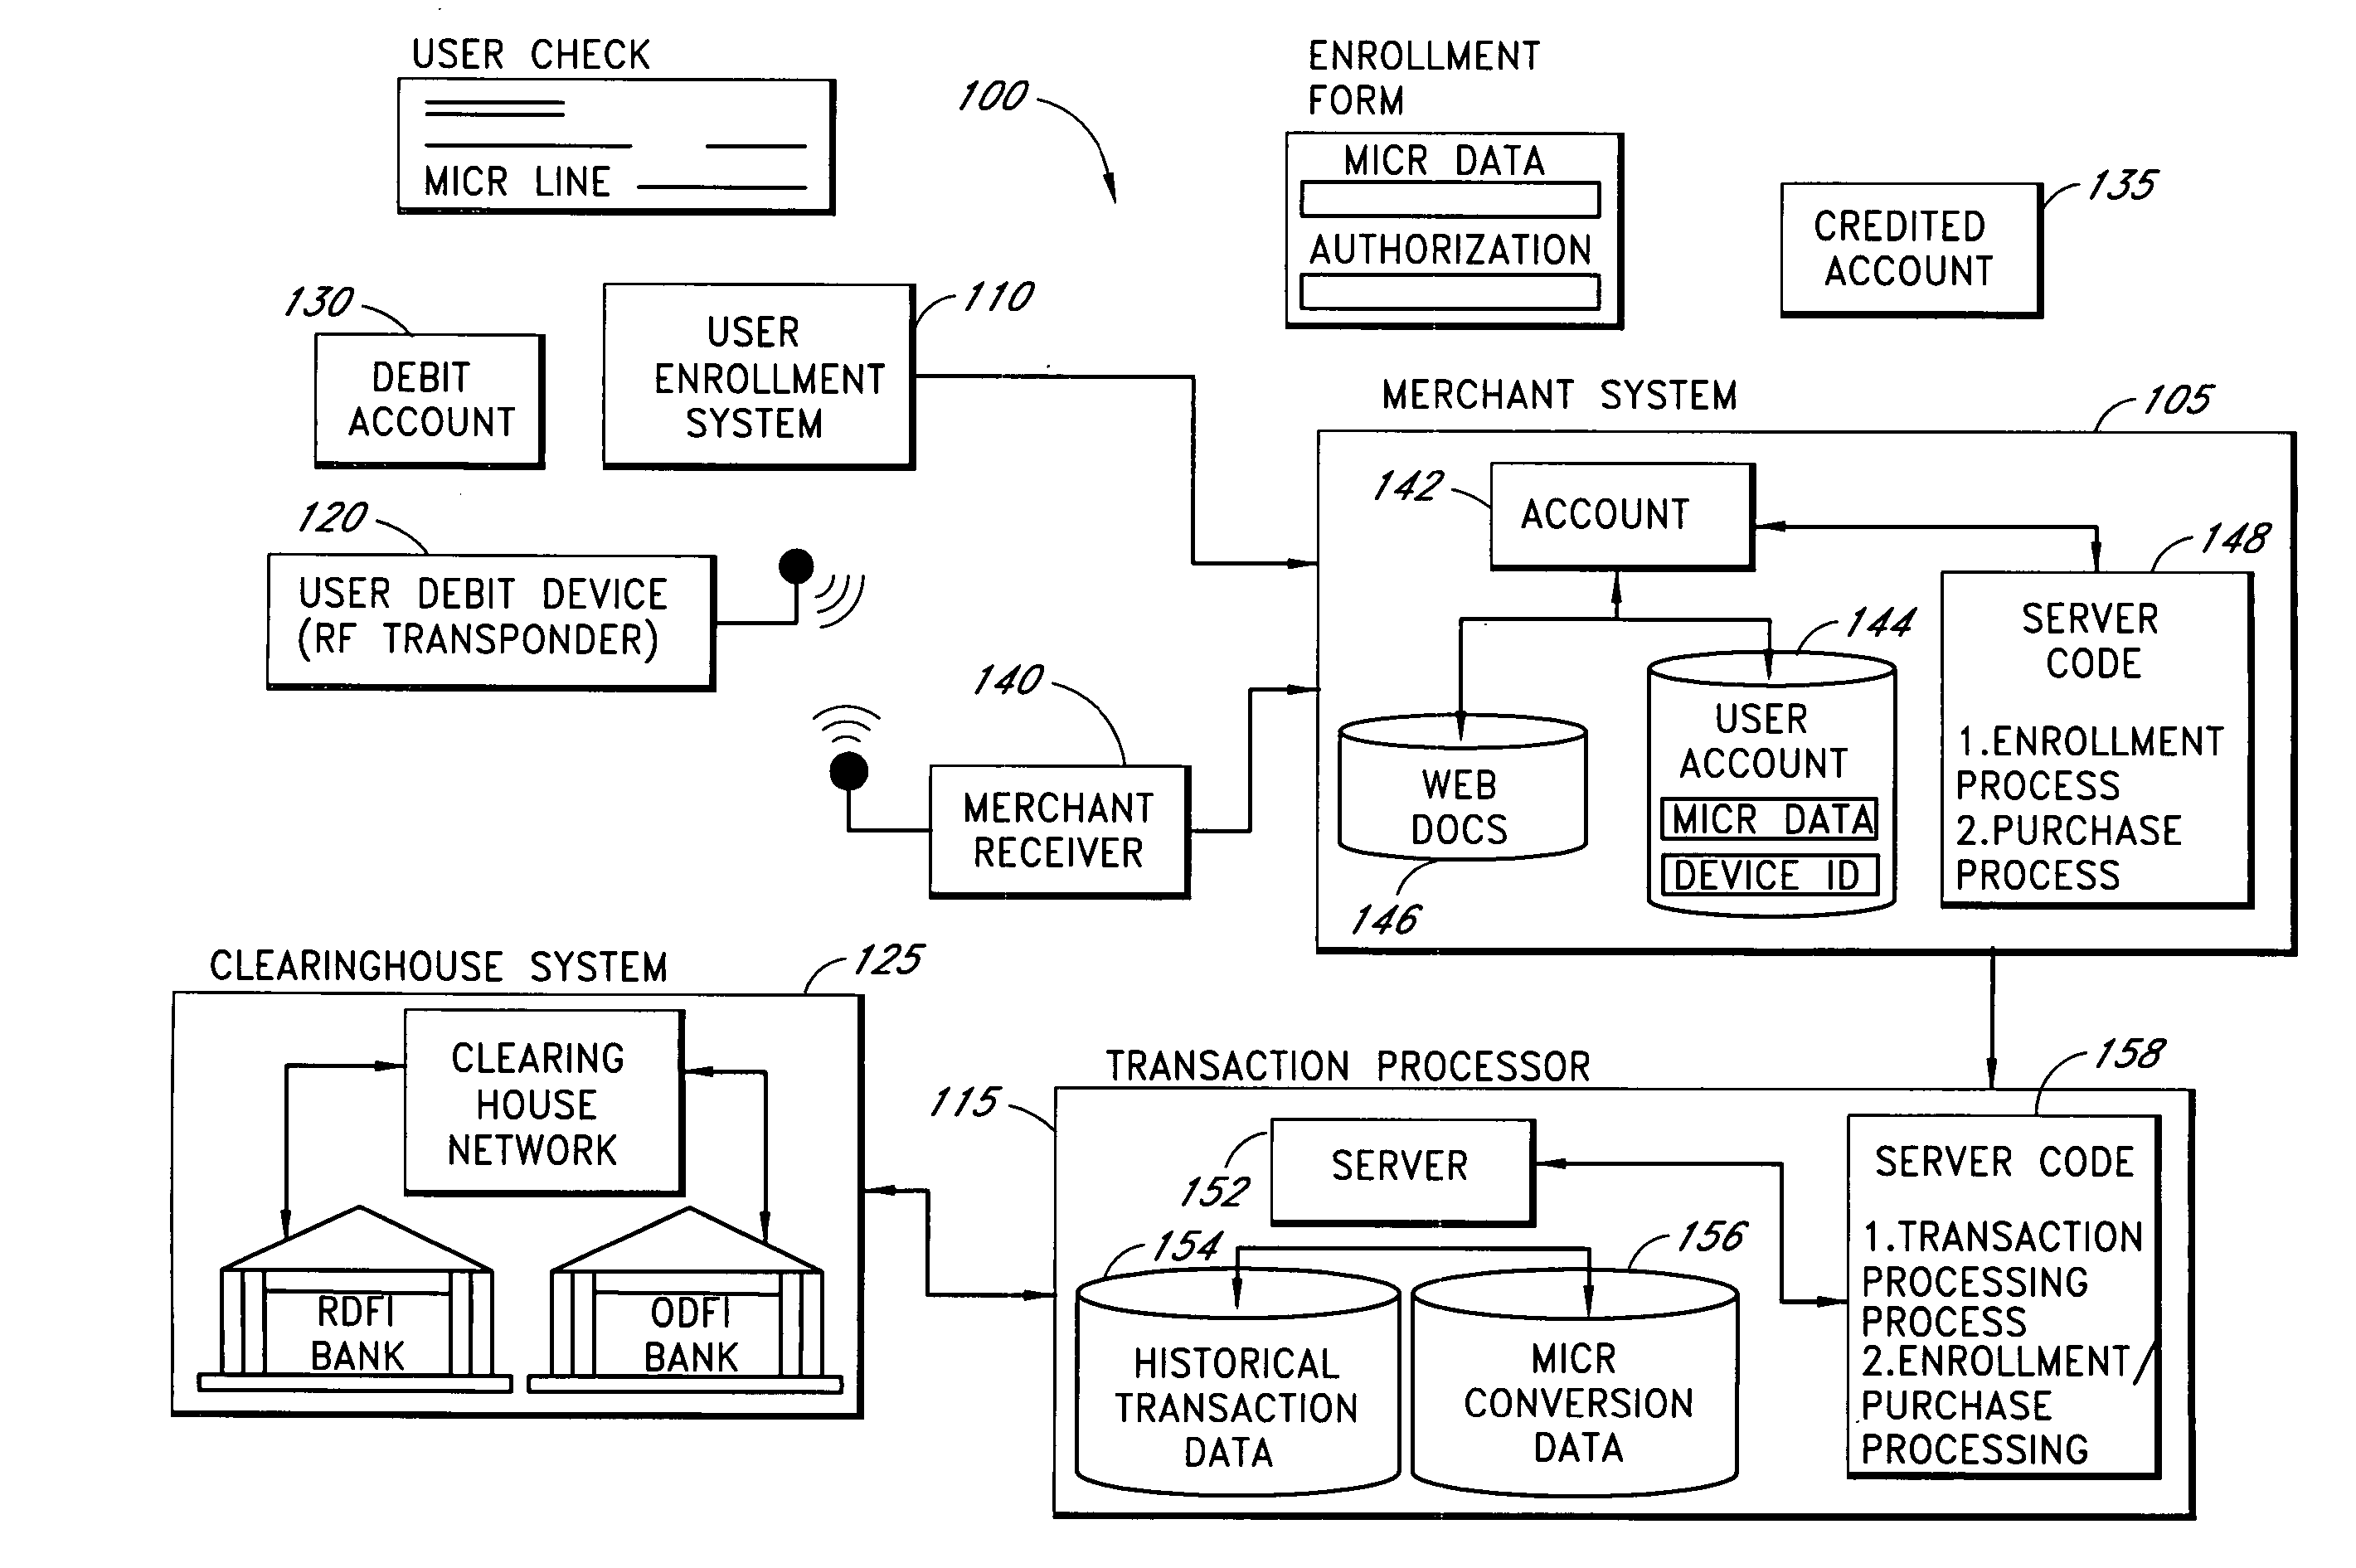 Alternative payment devices using electronic check processing as a payment mechanism